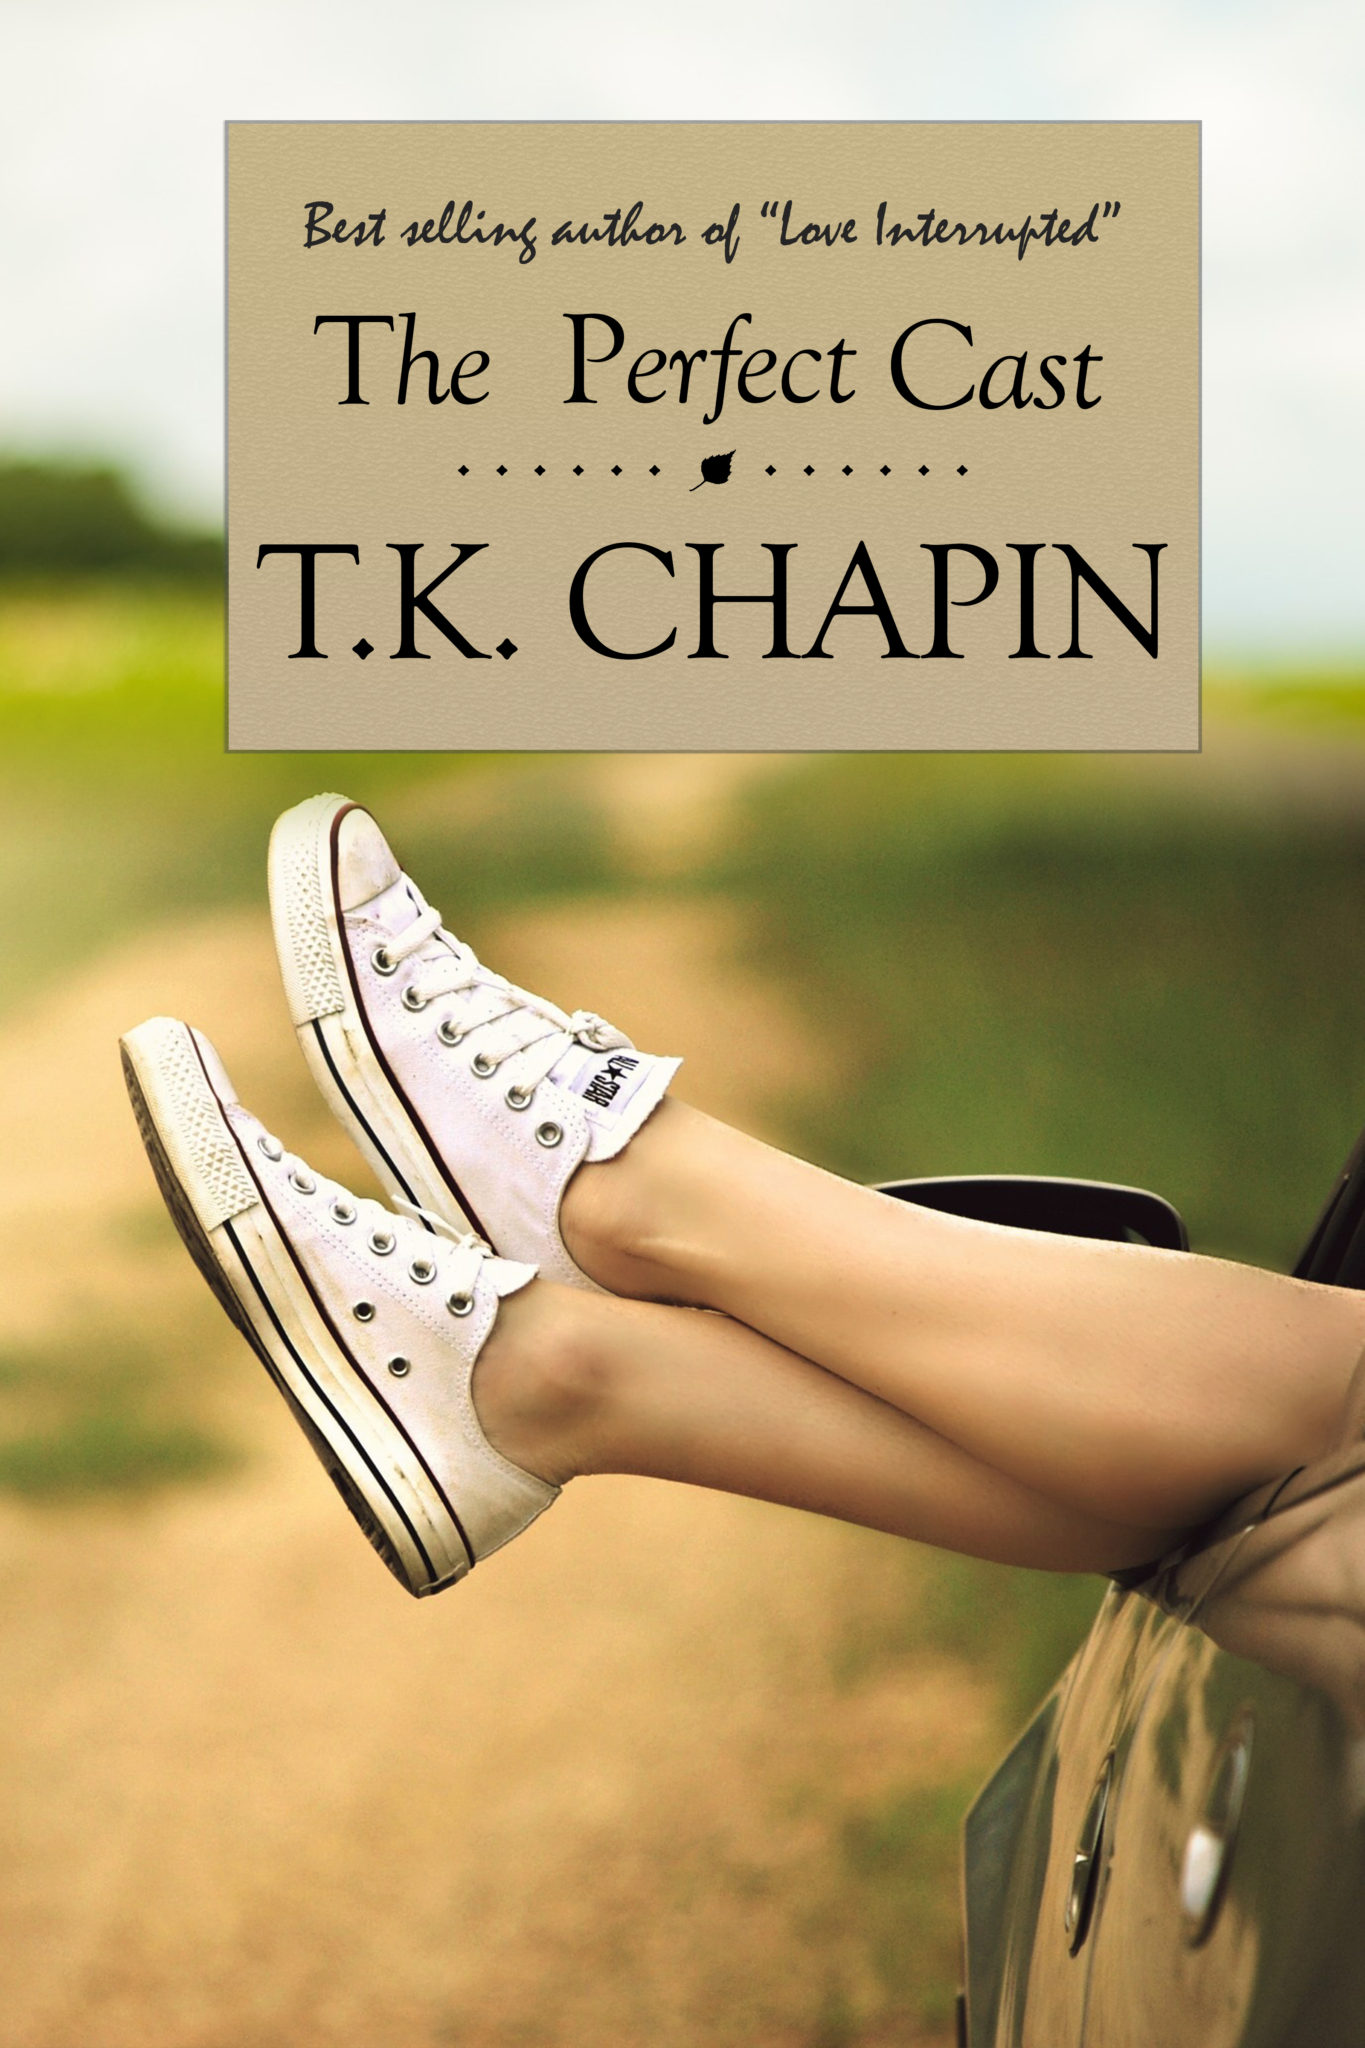 FREE: The Perfect Cast by TK Chapin